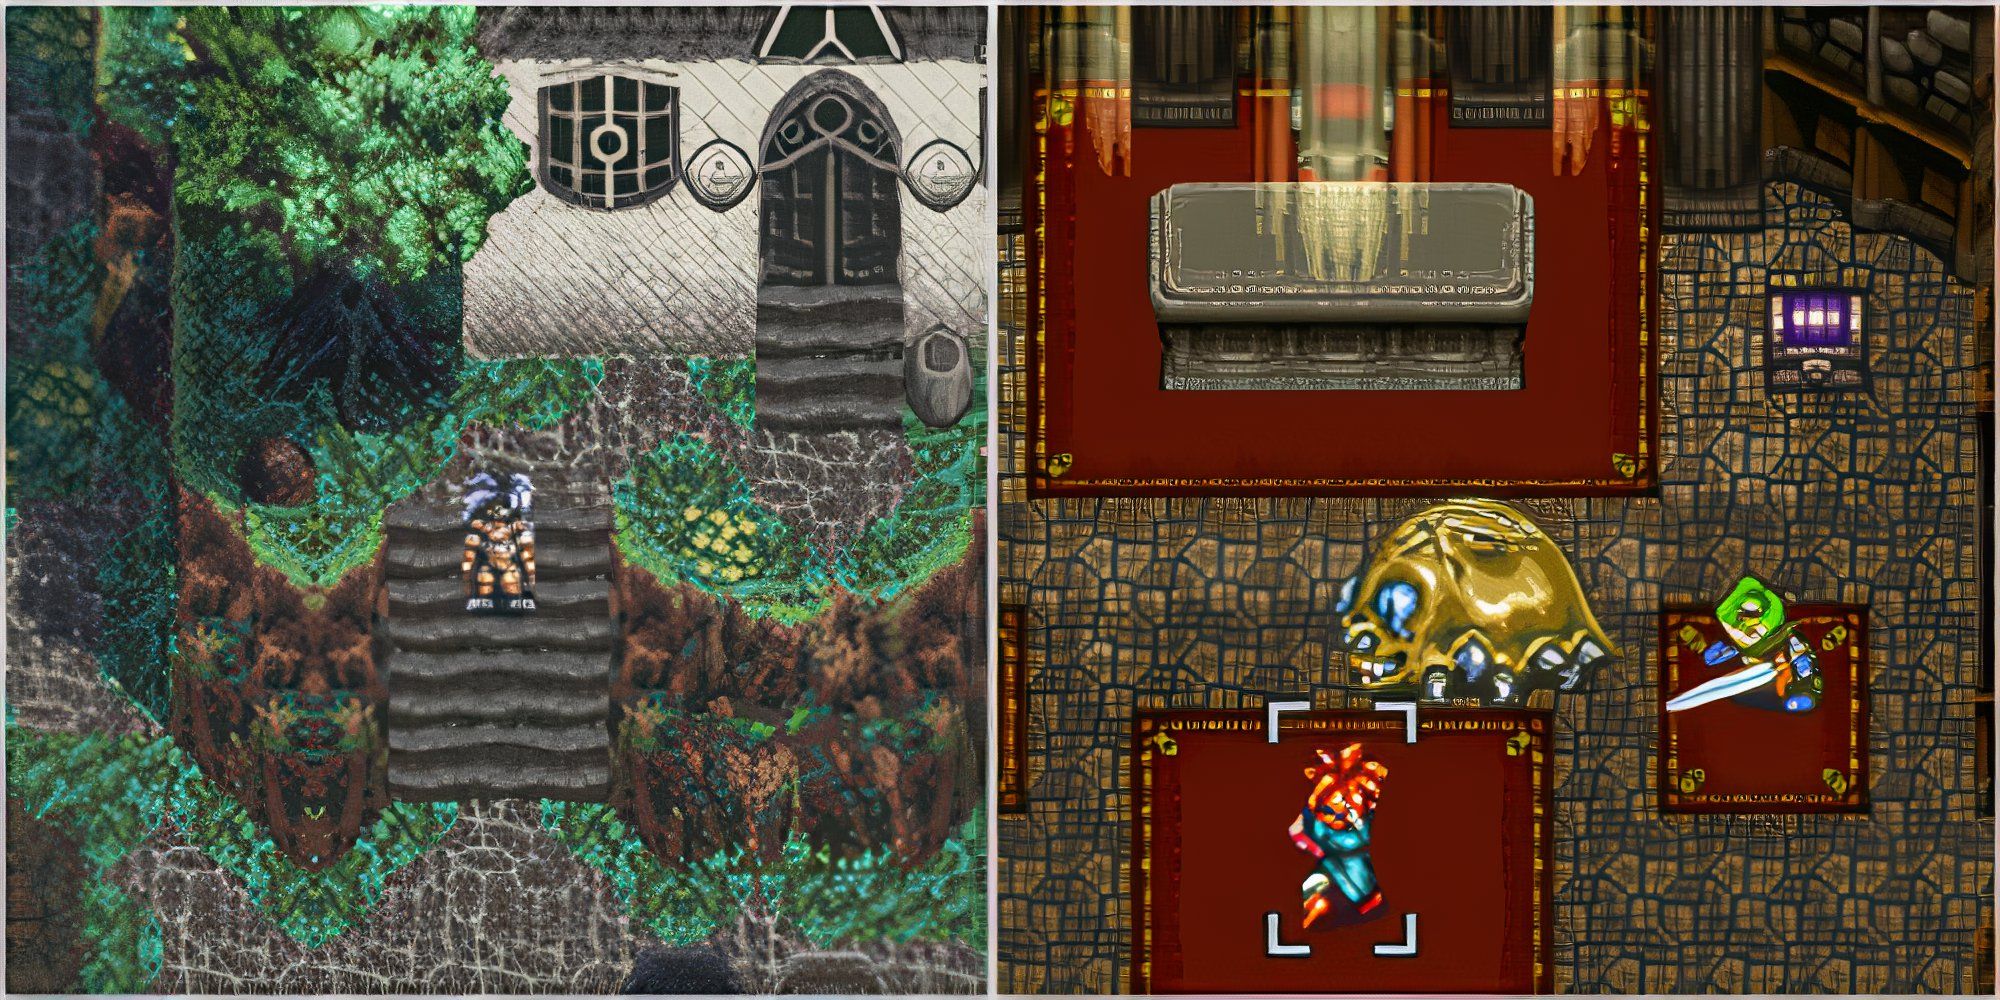 Exploring a town in Star Ocean and Fighting a boss in Chrono Trigger